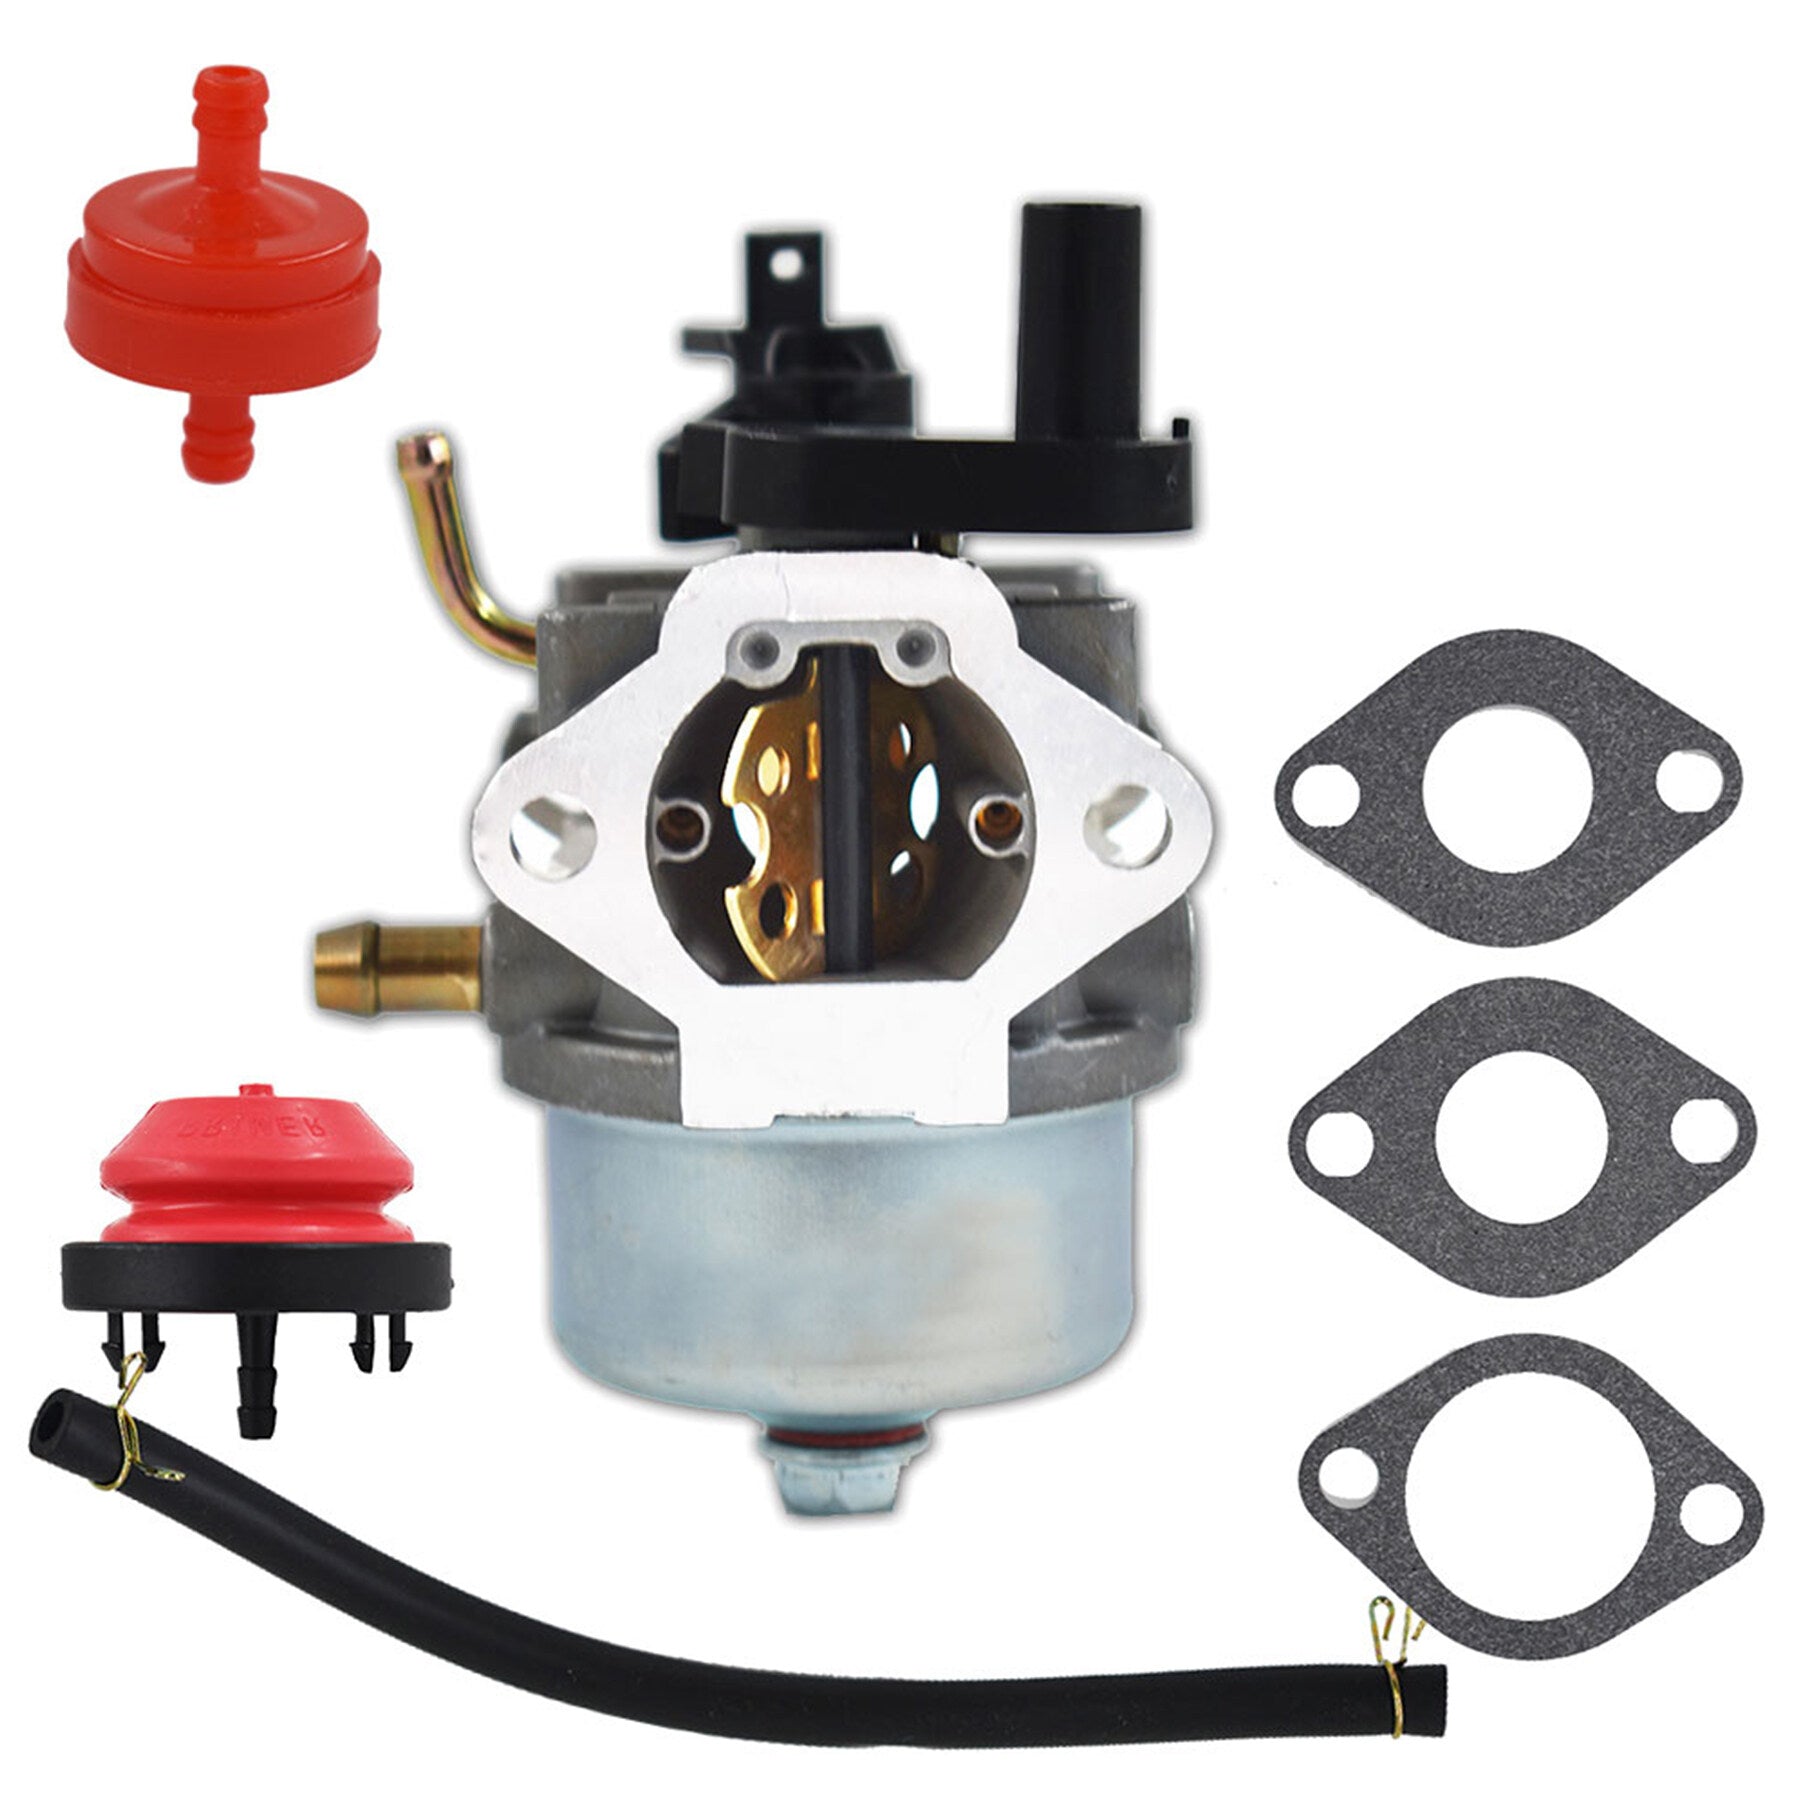 munirater Carburetor Replacement for Toro CCR2450 CCR3650 Poeerclear Lawnboy Insight Snowblower 801396 801233 801255 Engines